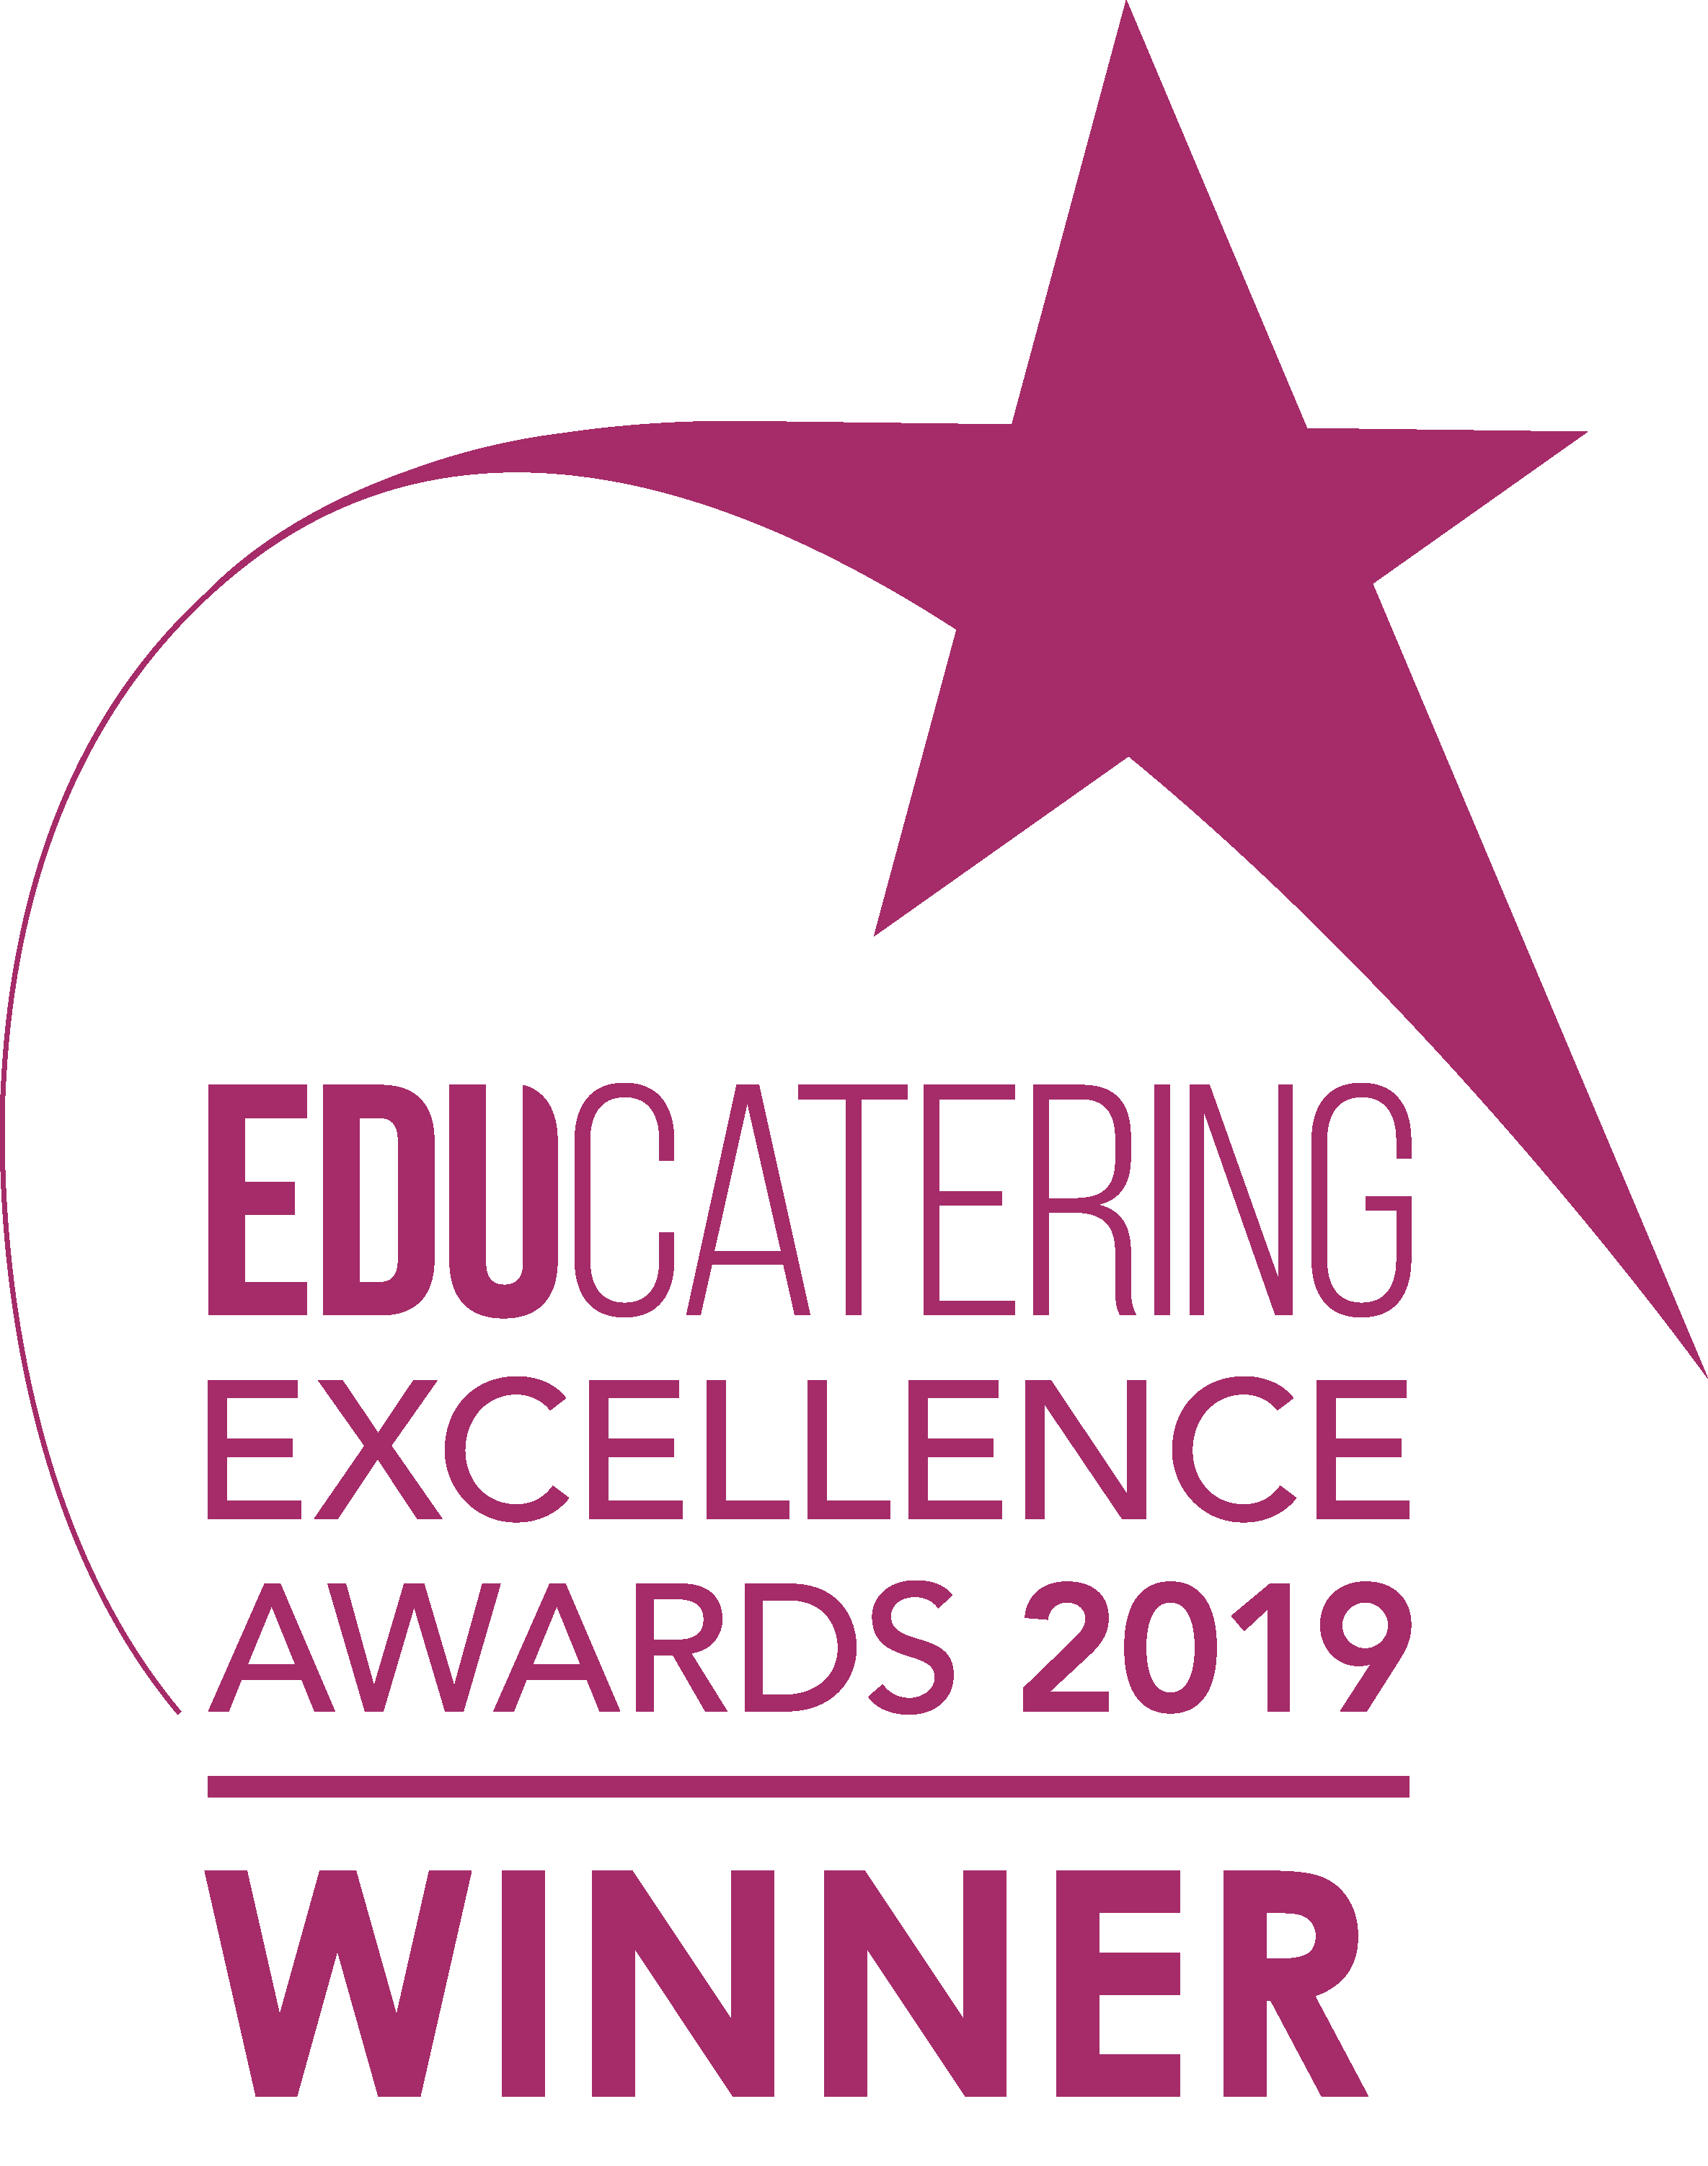 Educatering Excellence Award 2019